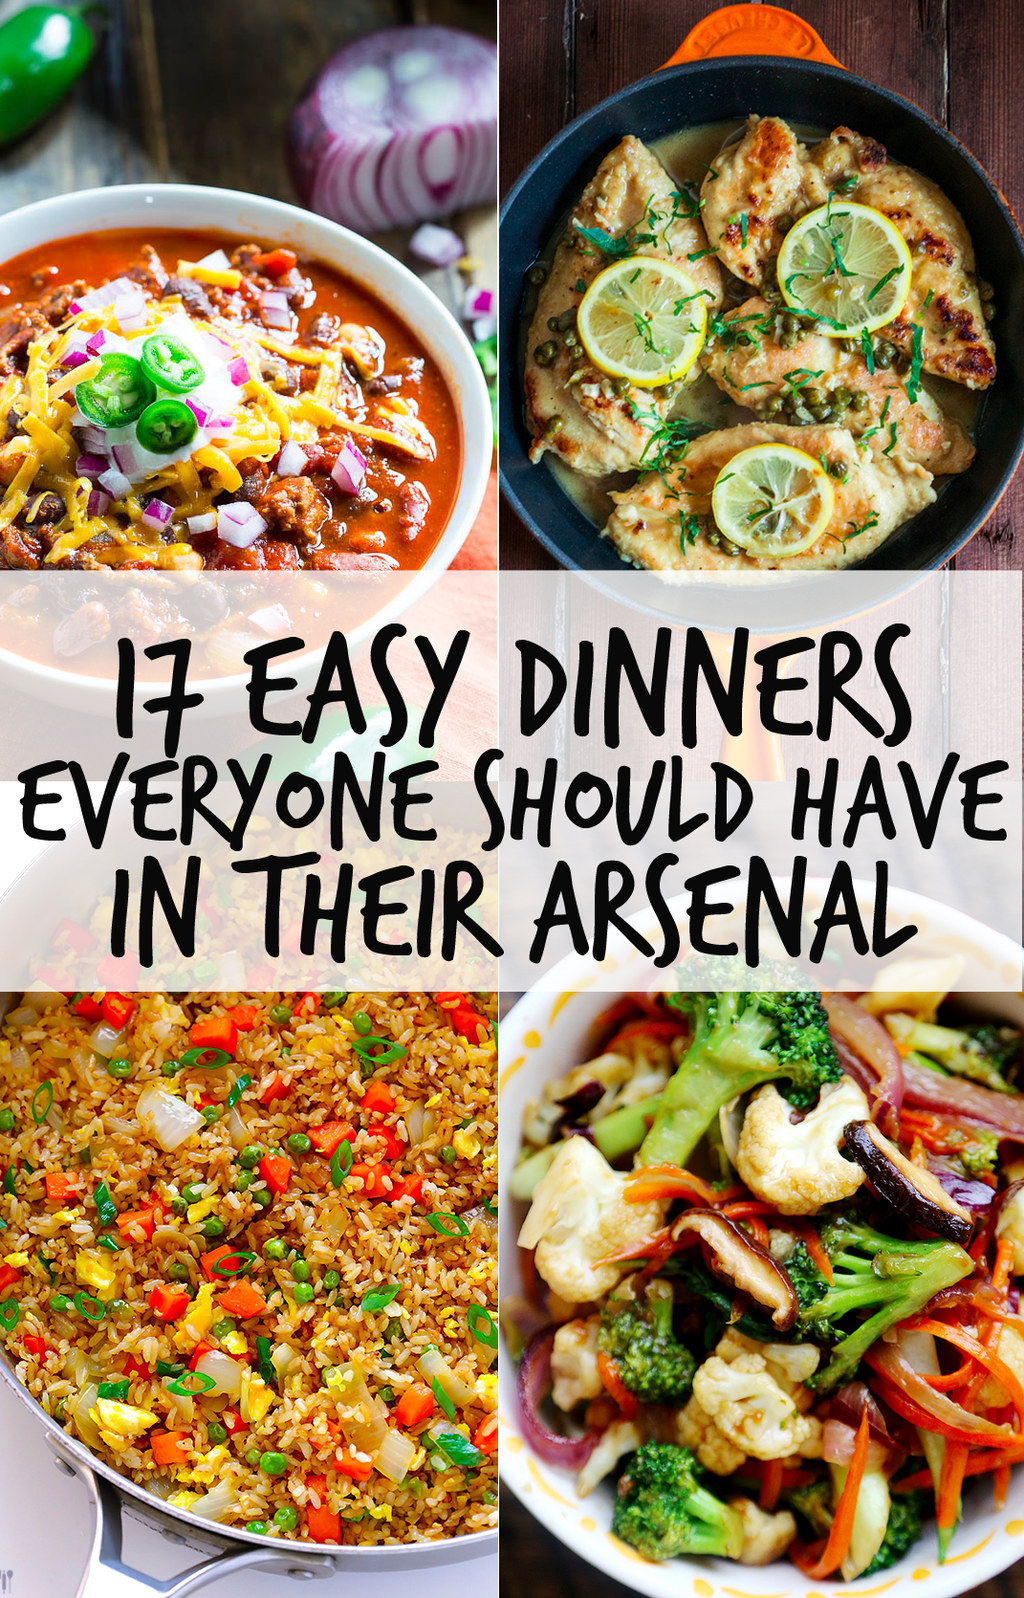 17 Easy Dinners Everyone Should Have In Their Arsenal